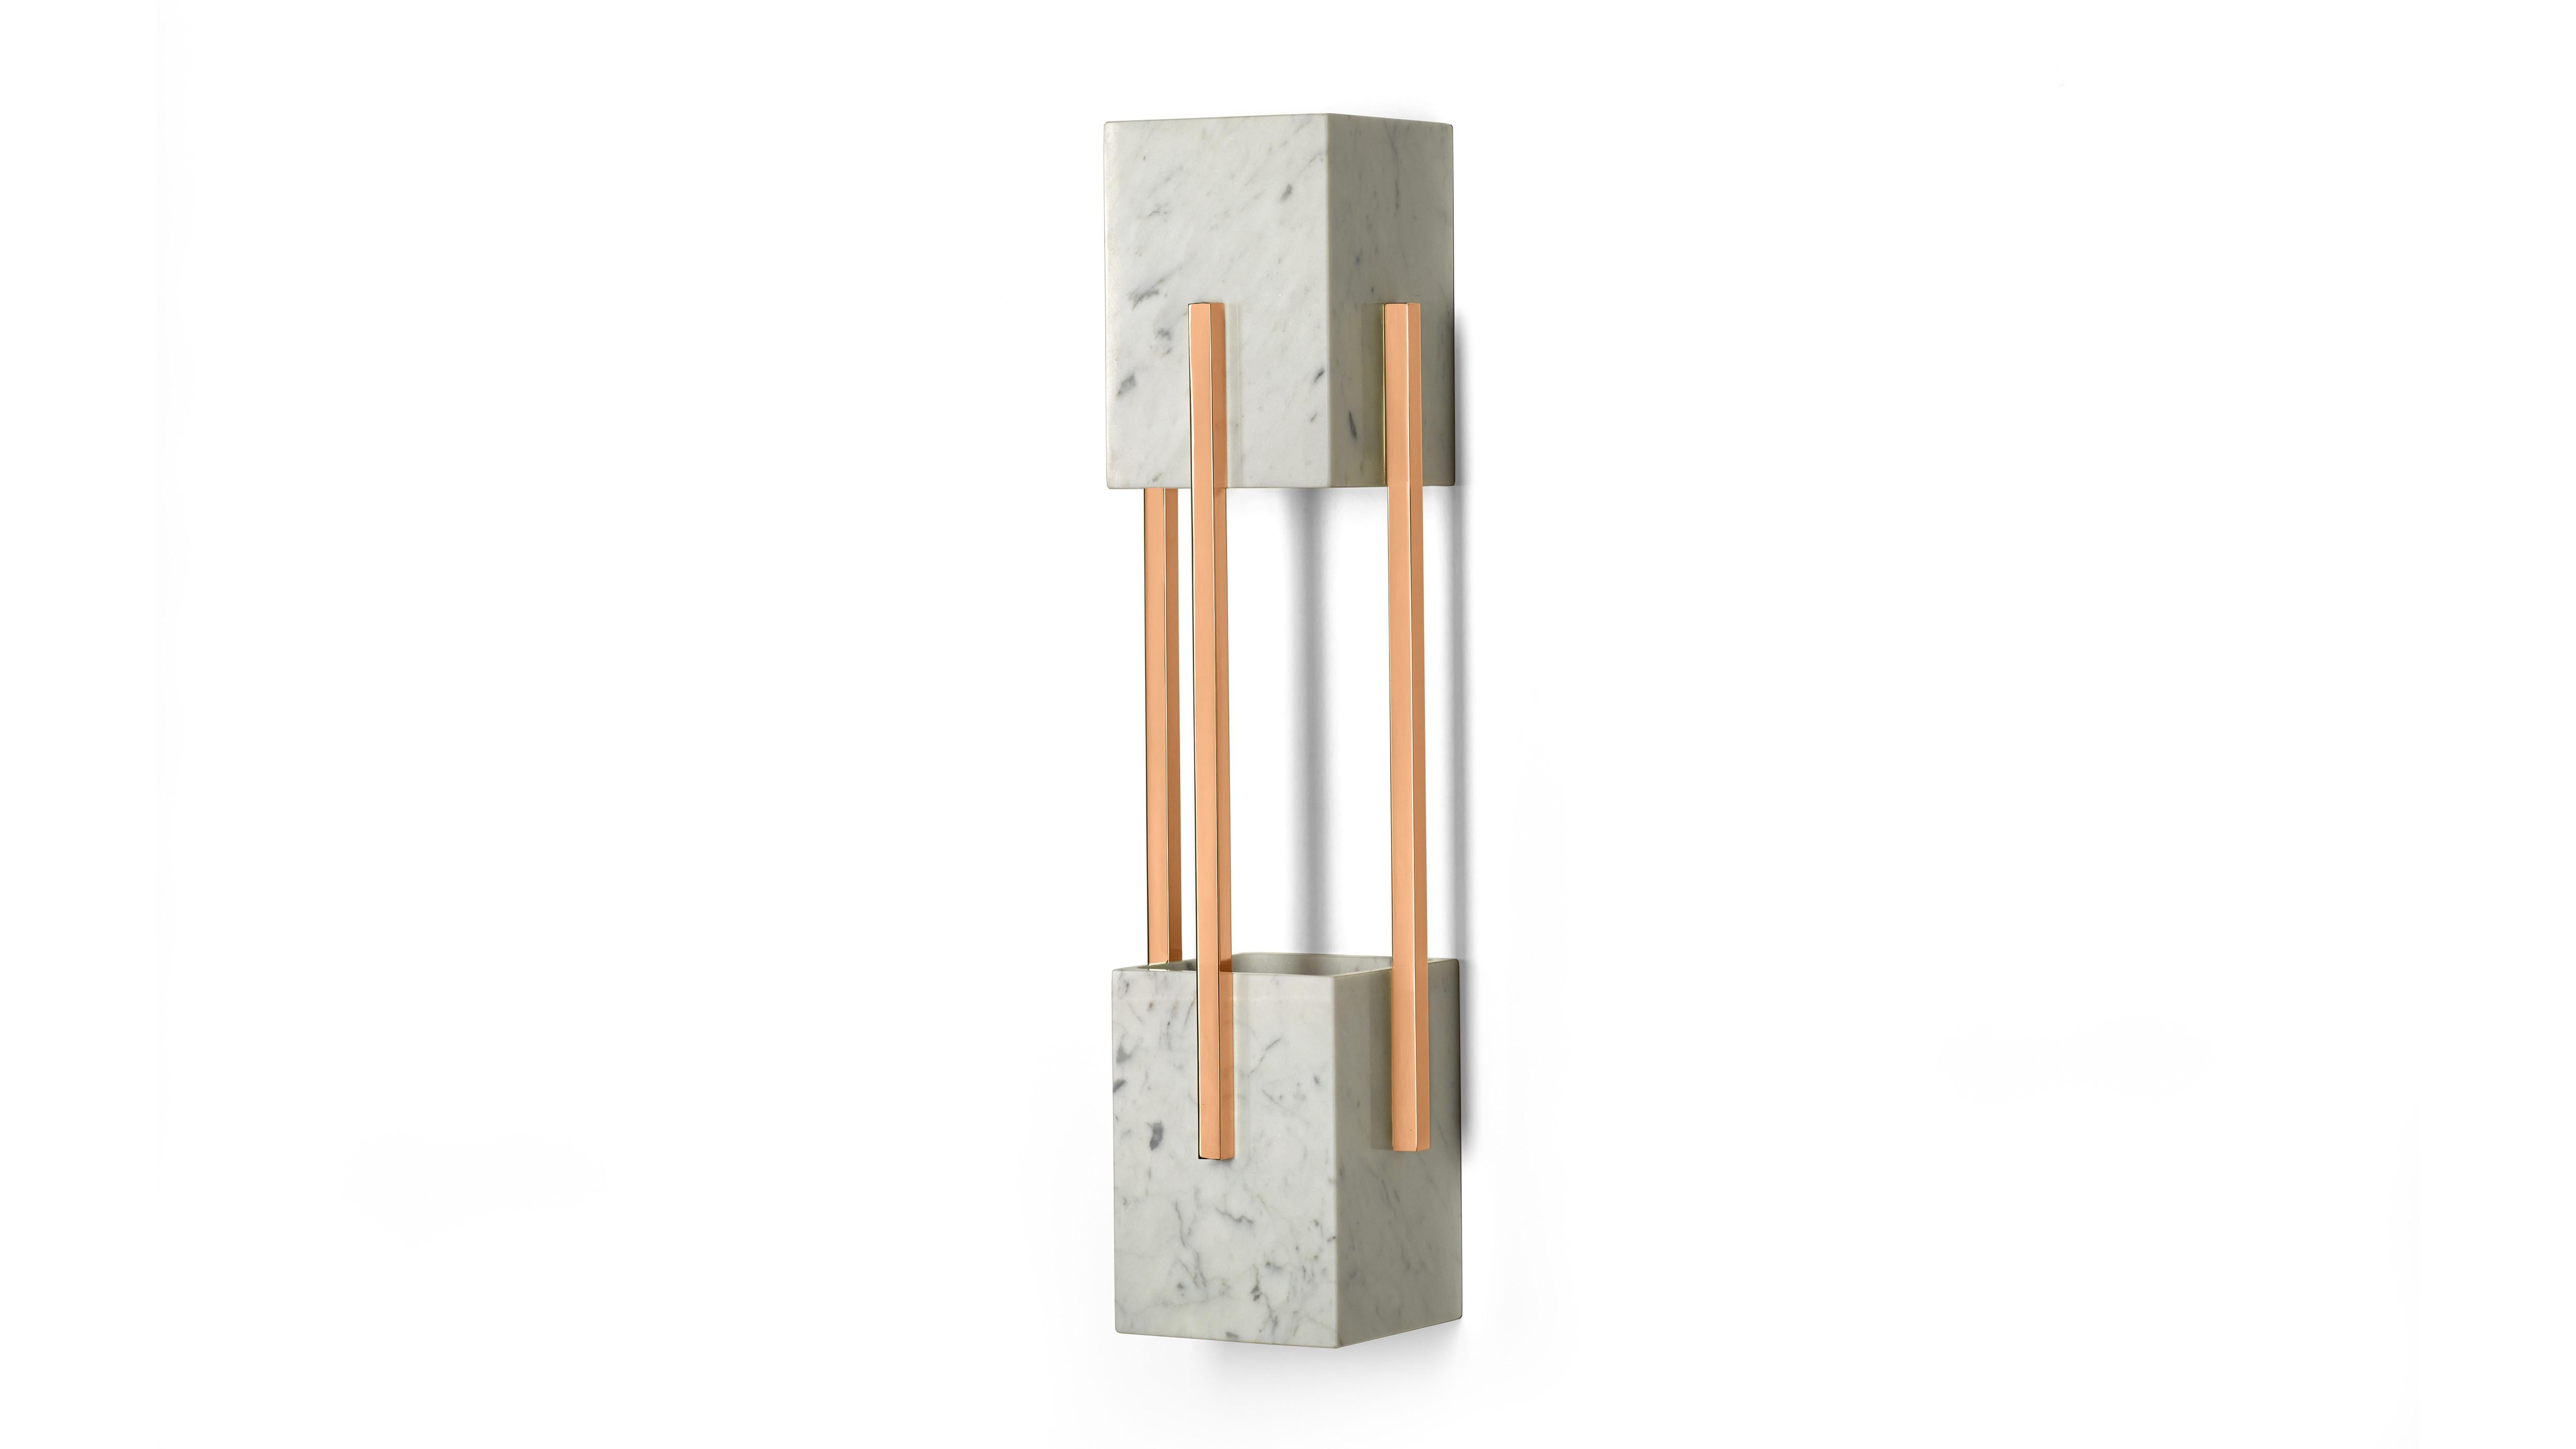 Block form Carrara marble shade and base wall scone with polished copper details. Handcrafted. Various marble and brass or steel finishes are also available.